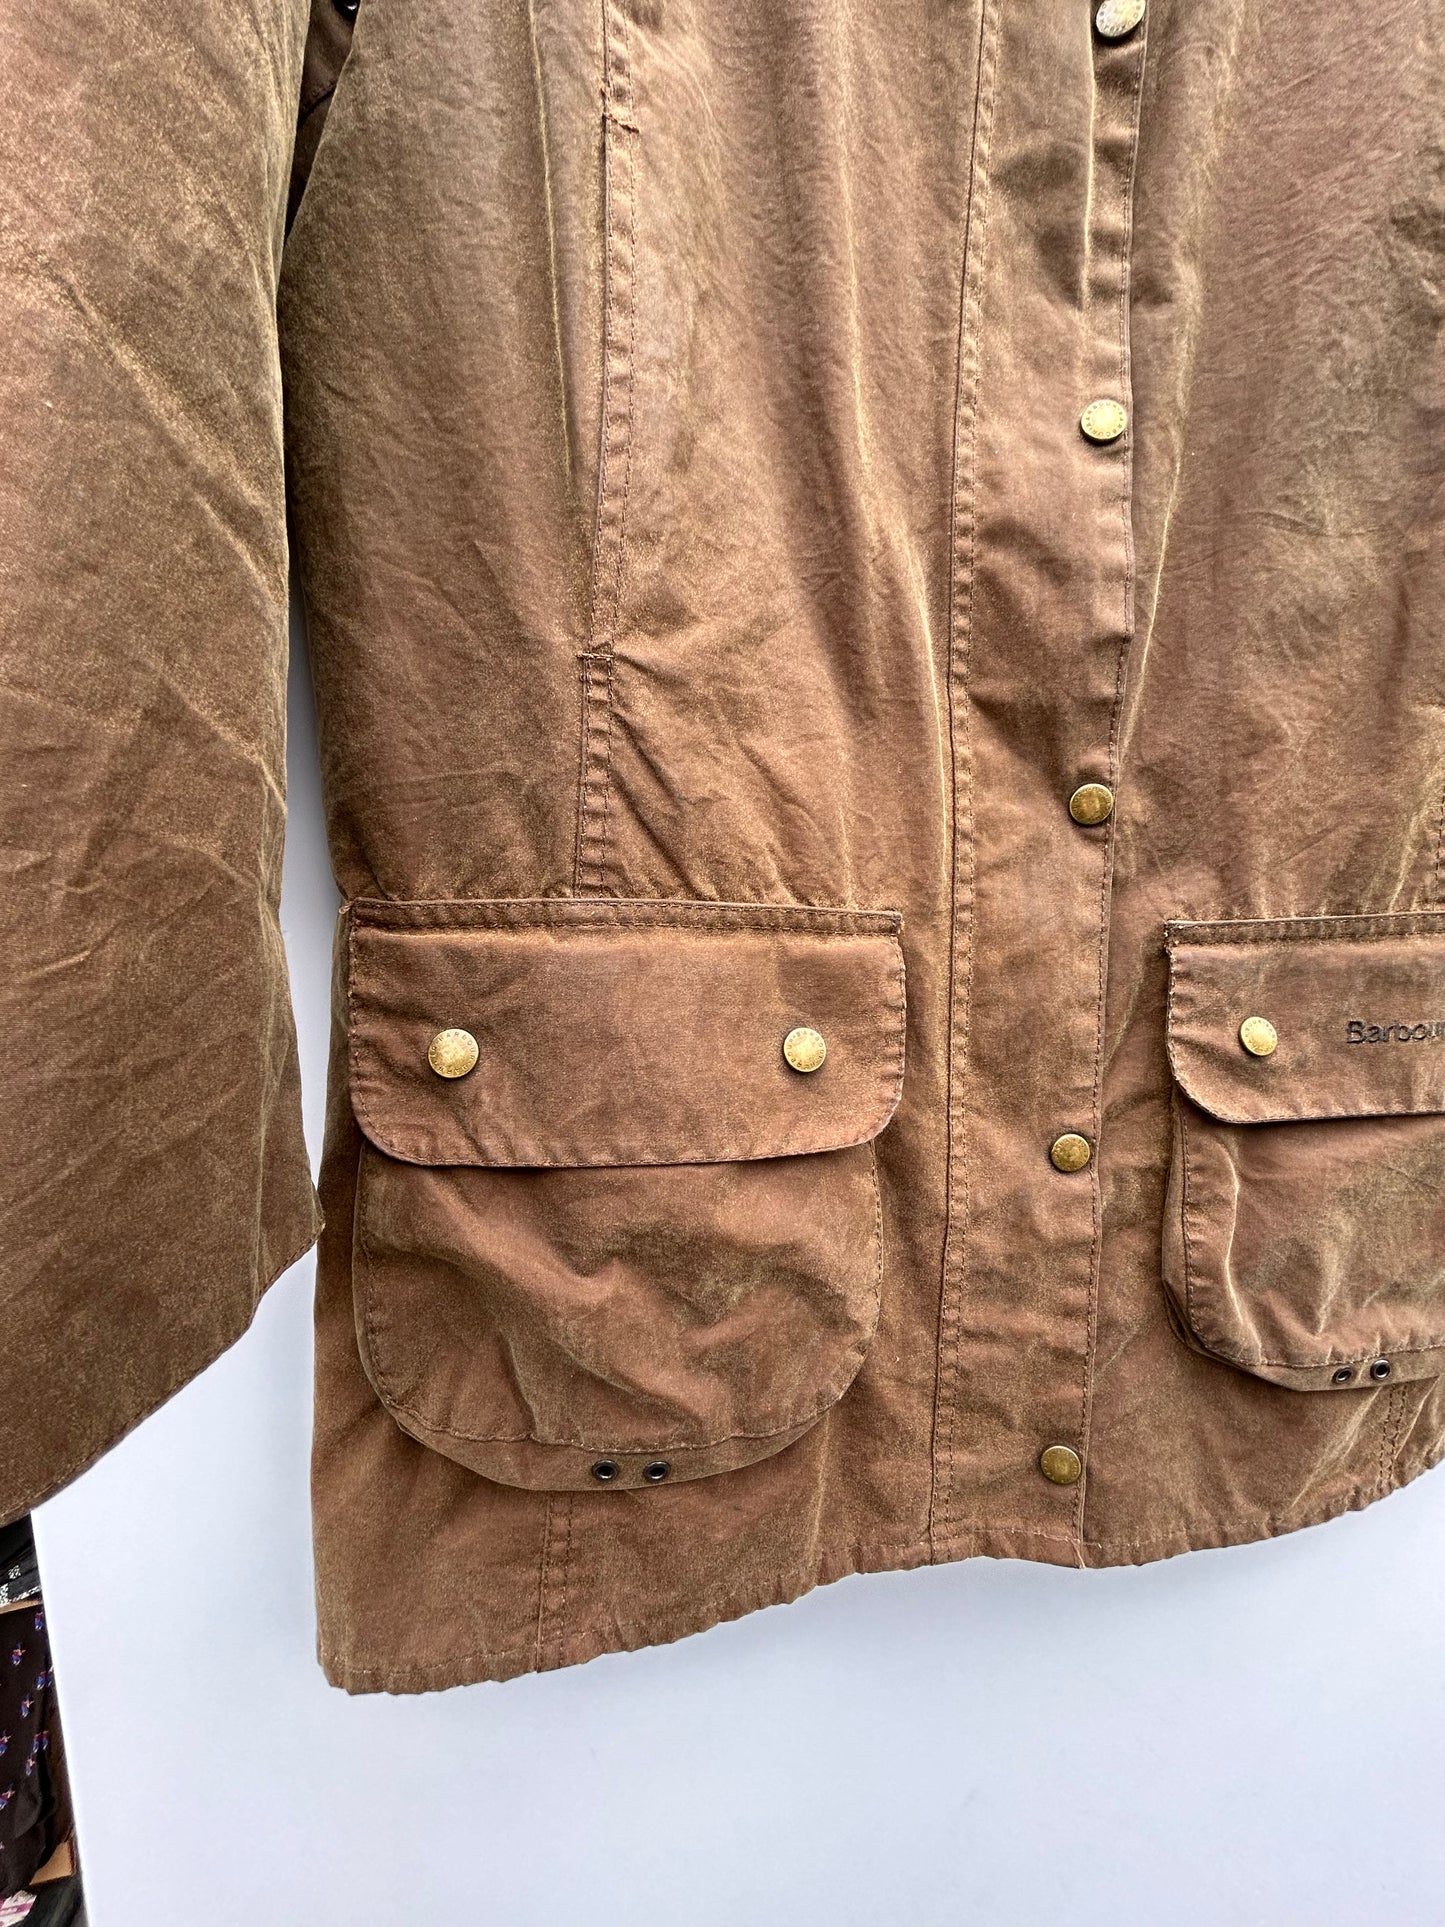 Barbour Giacca Beige donna Field Newmarket tg. 42 Brown Waxed Field lady Jacket UK14